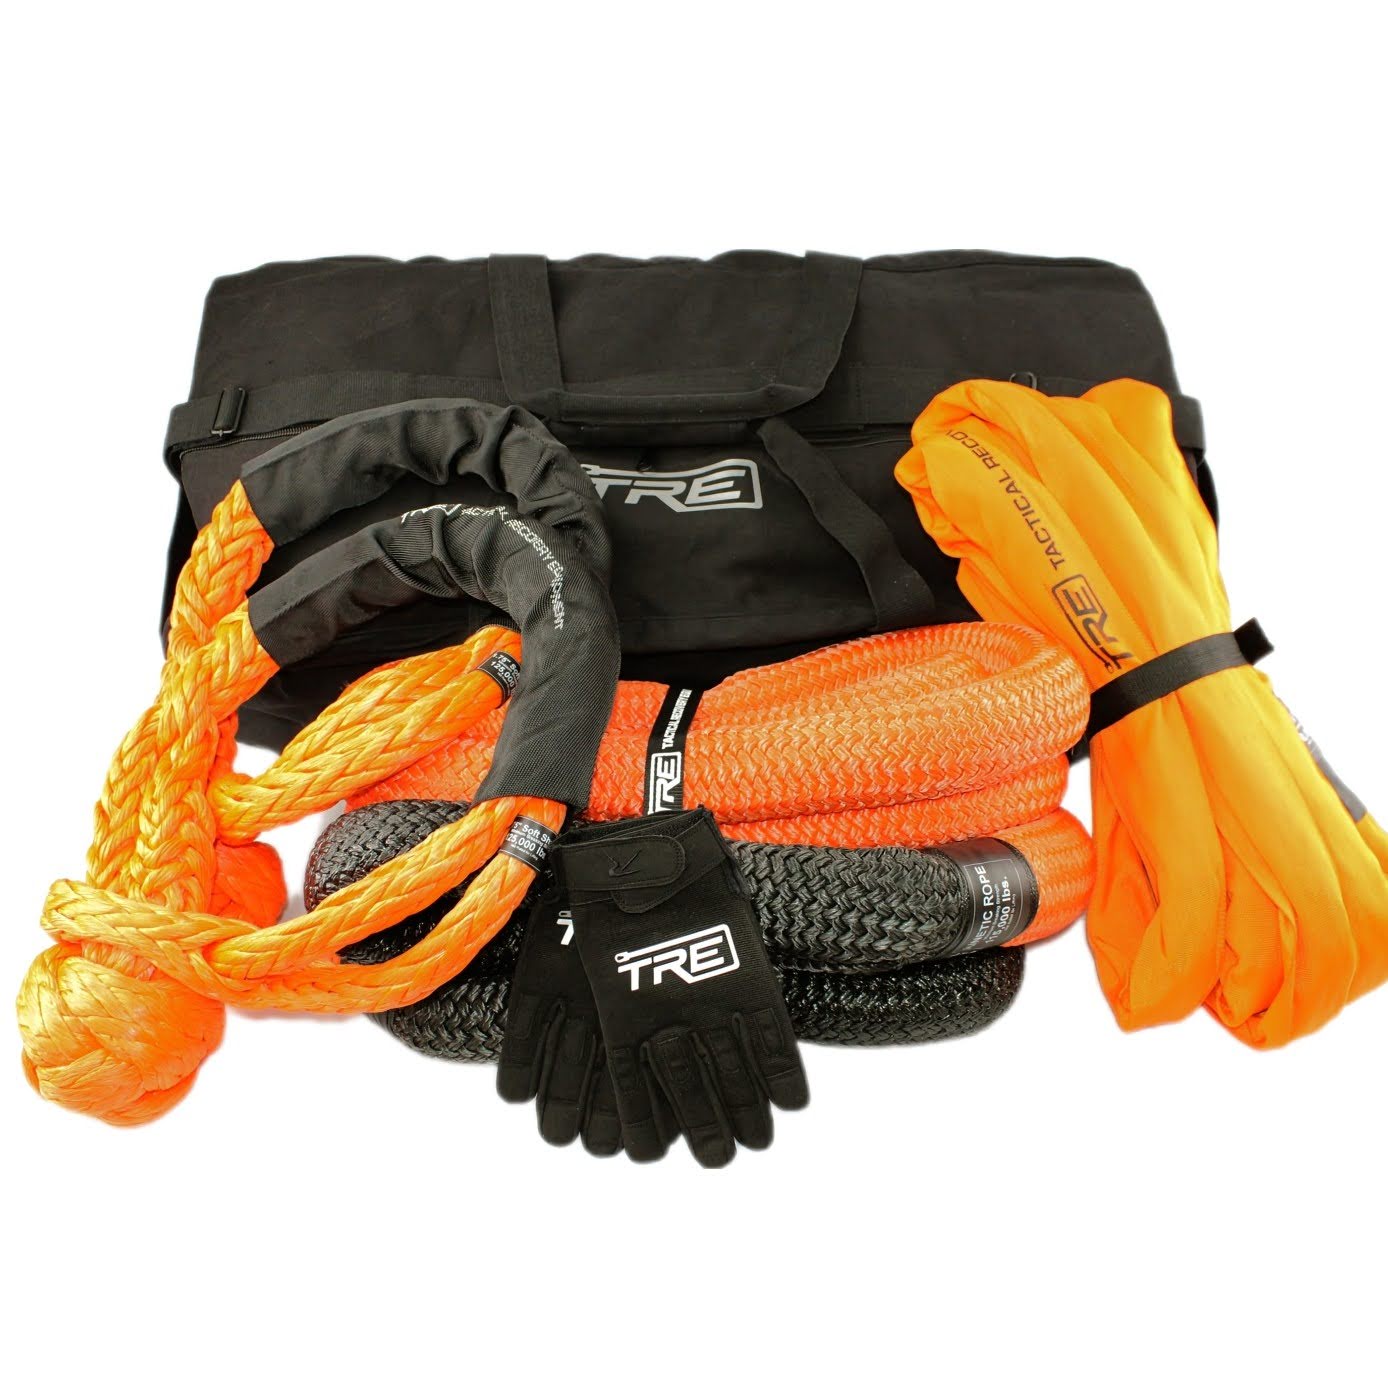 Extreme Recovery Gear Kit - For vehicles up to 80,000 lbs. - TRE